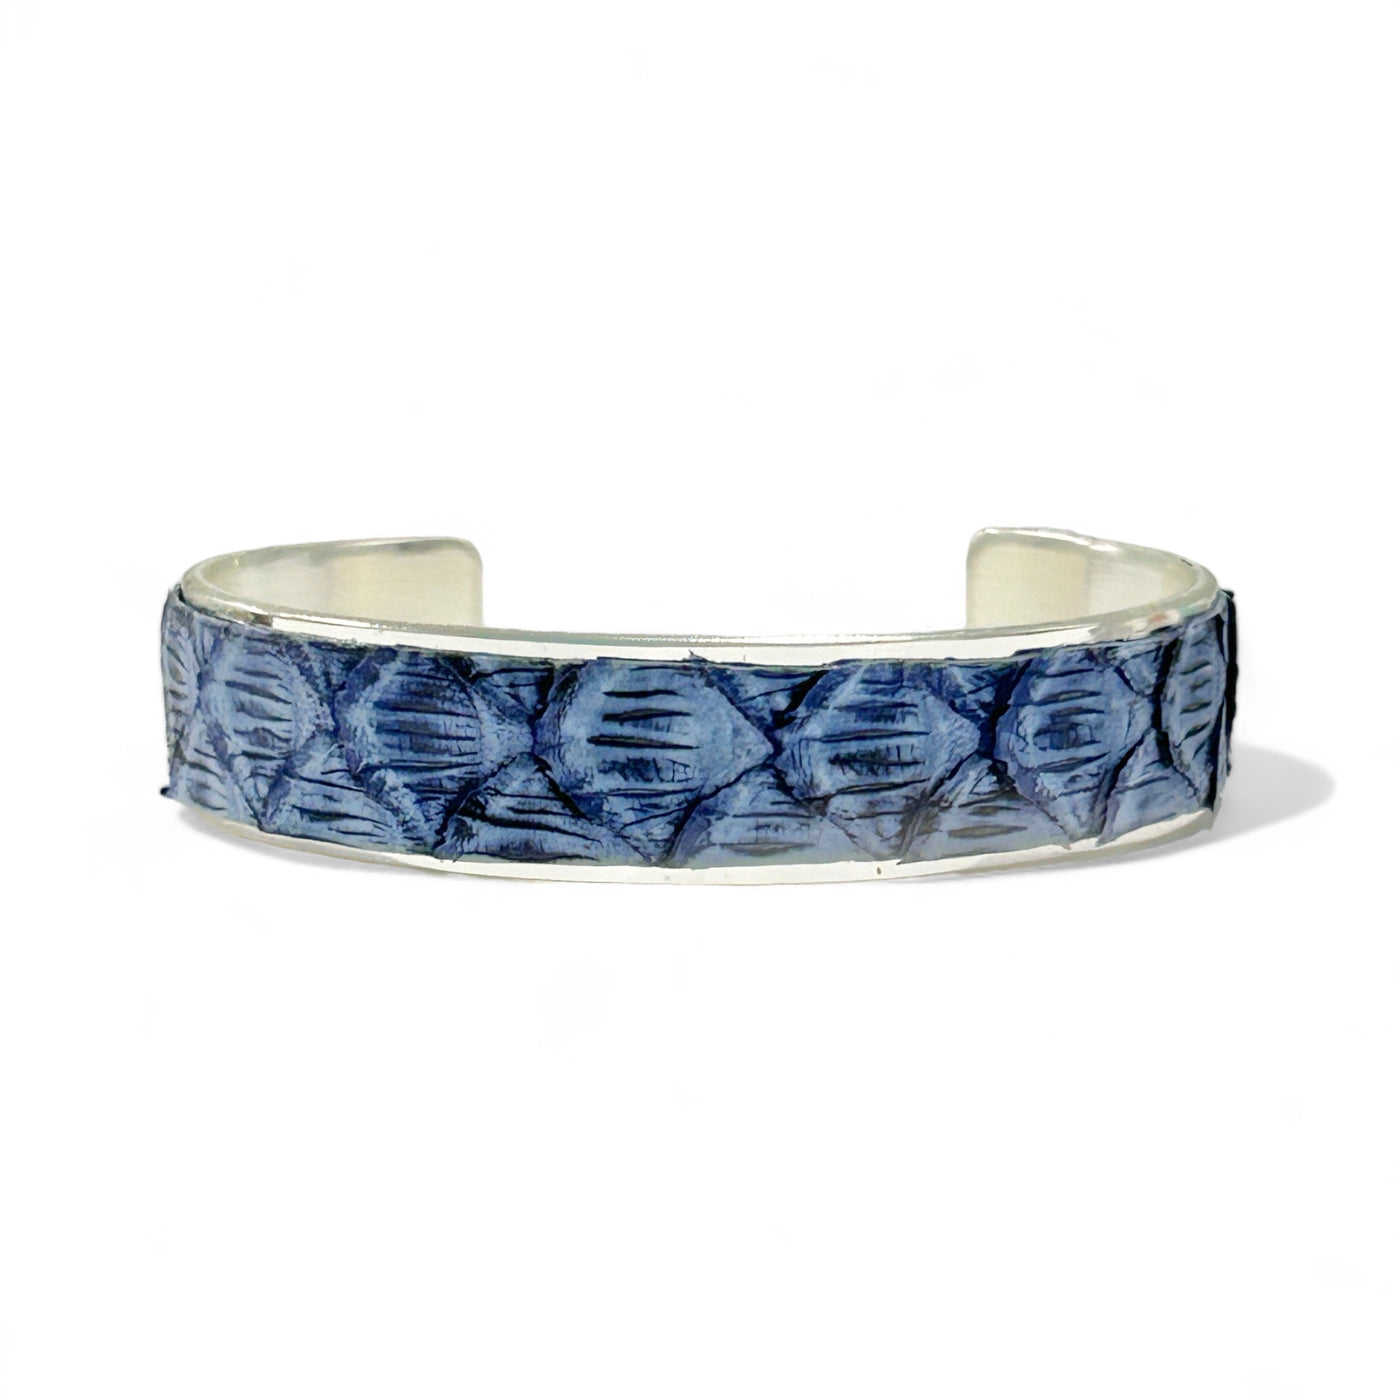 Periwinkle Suede Python .5 Cuff on Silver